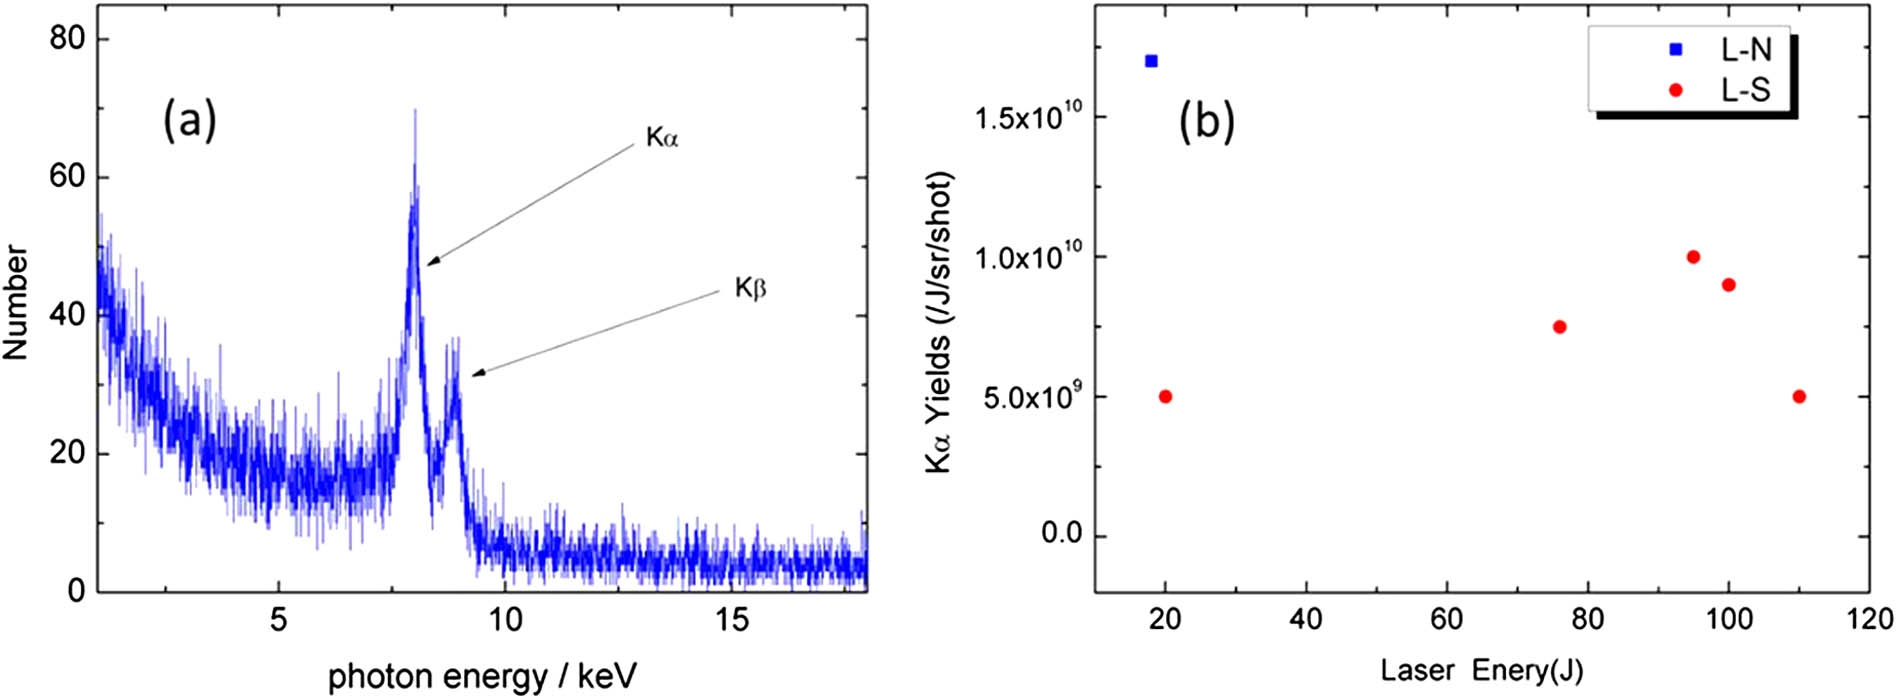 (a) Spectrum of K-shell lines obtained for 94.8 J laser incidence on the target with 20 μm nanowires; (b) dependence of the total count of Kα on the laser energy for the target with 20 μm nanowires.